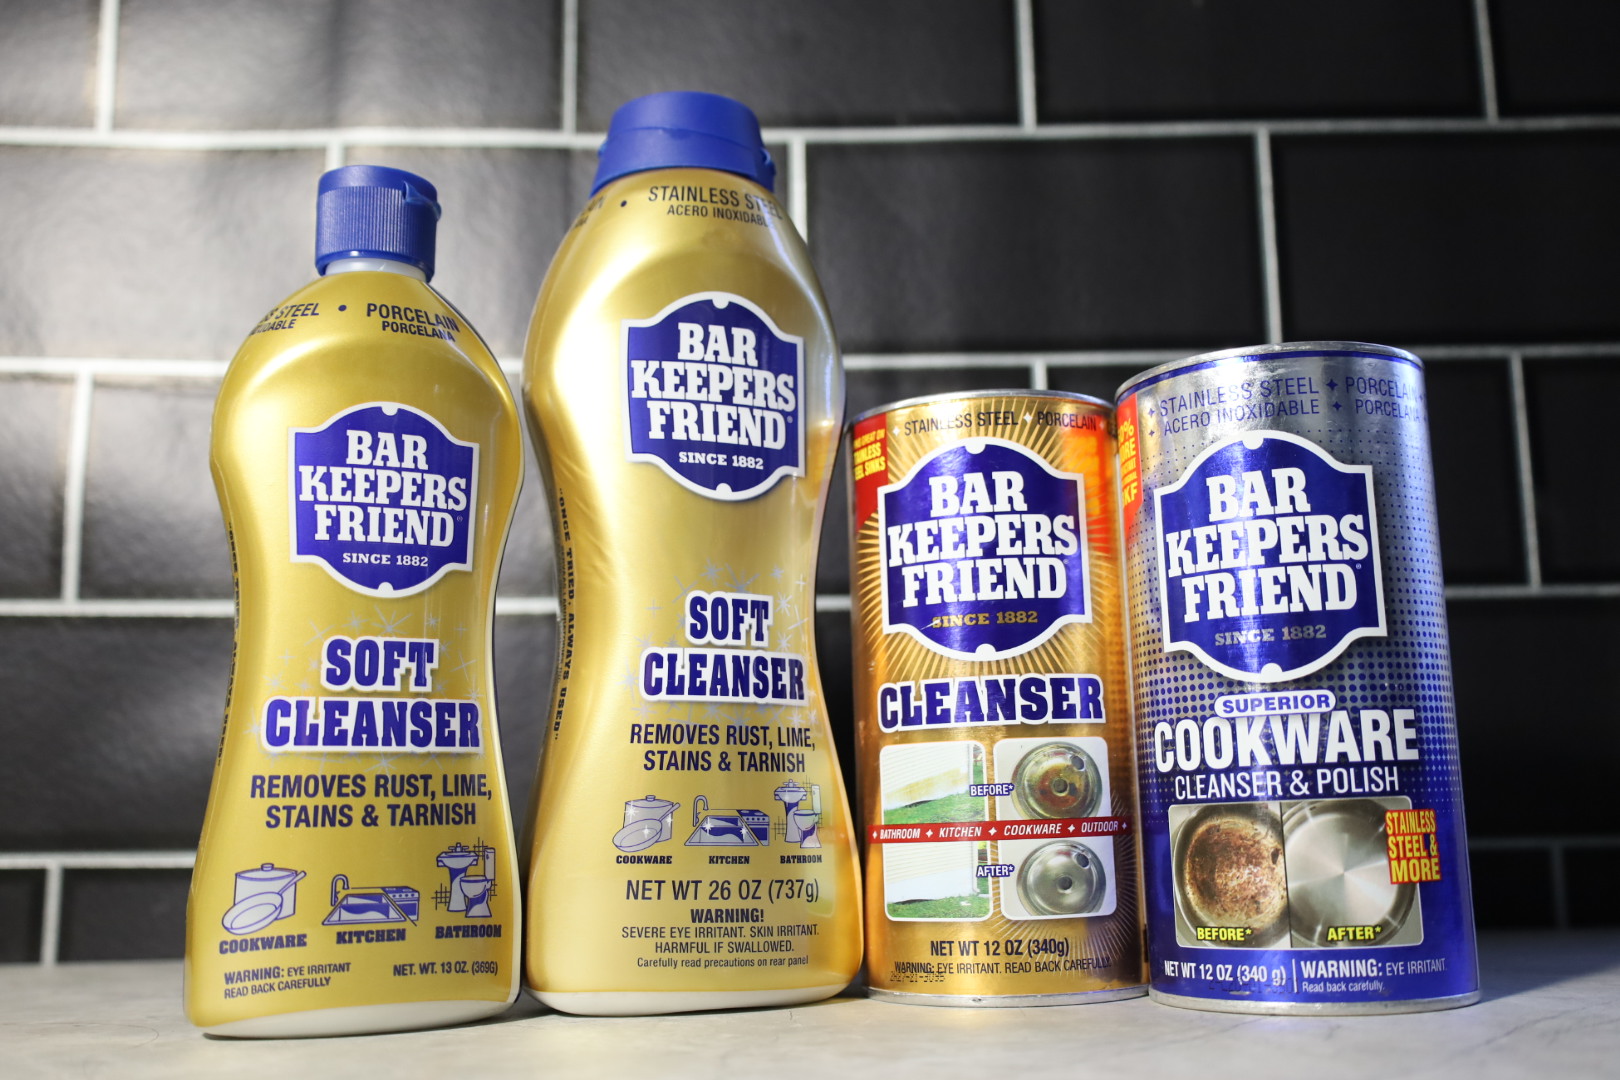 Bar Keepers Friend Cleanser & Polish 340g Can Product Image 2